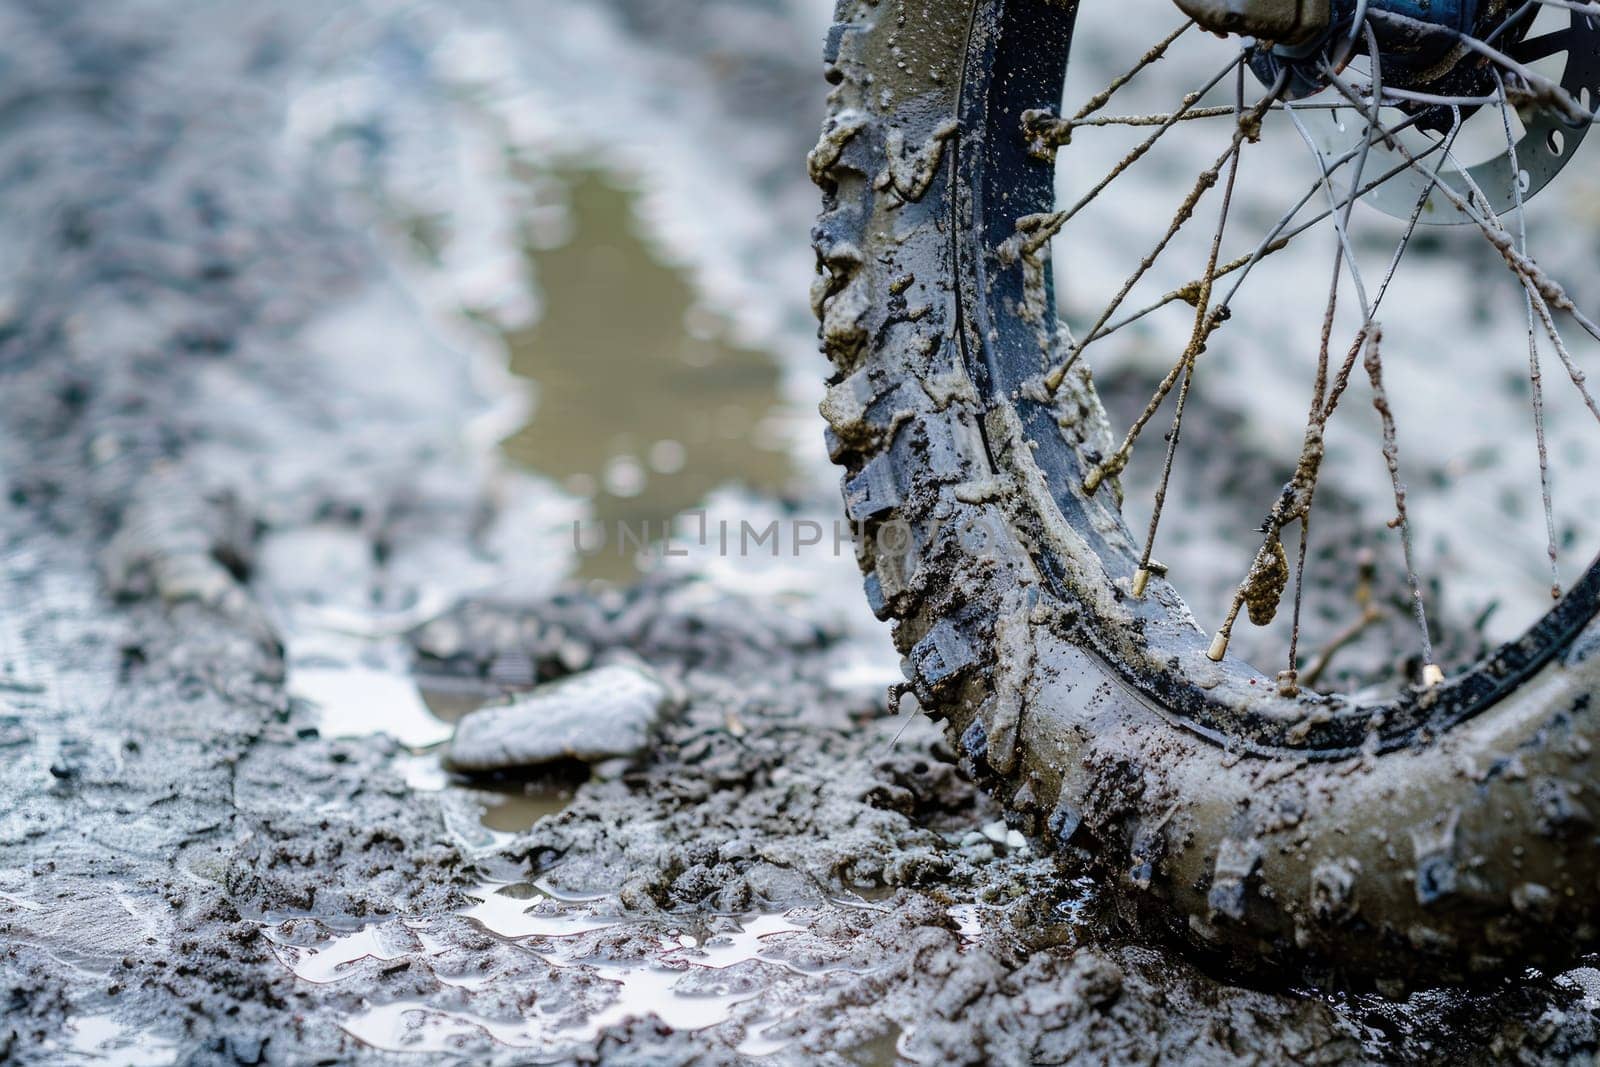 Close-up of Muddy Balance Bike Tire with Terrain Textures Imprinted.